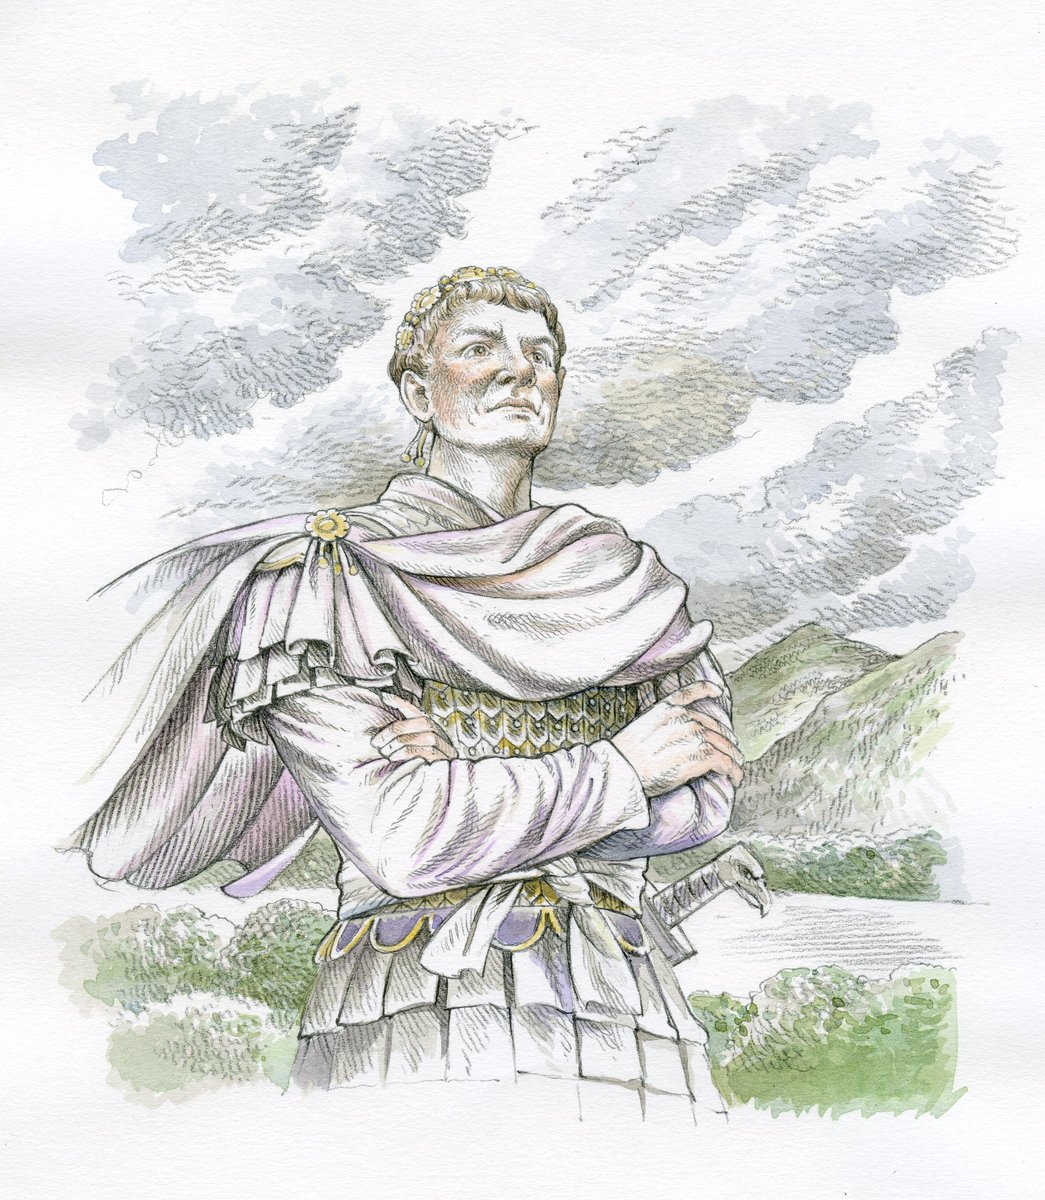 "The Caesar Cut"The Romans certainly had a keen sense of style, which was adopted to a greater or lesser degree in outlying regions of the Roman Empire, which briefly included southern Scotland. They also of course knew the therapeutic value of a good bath!